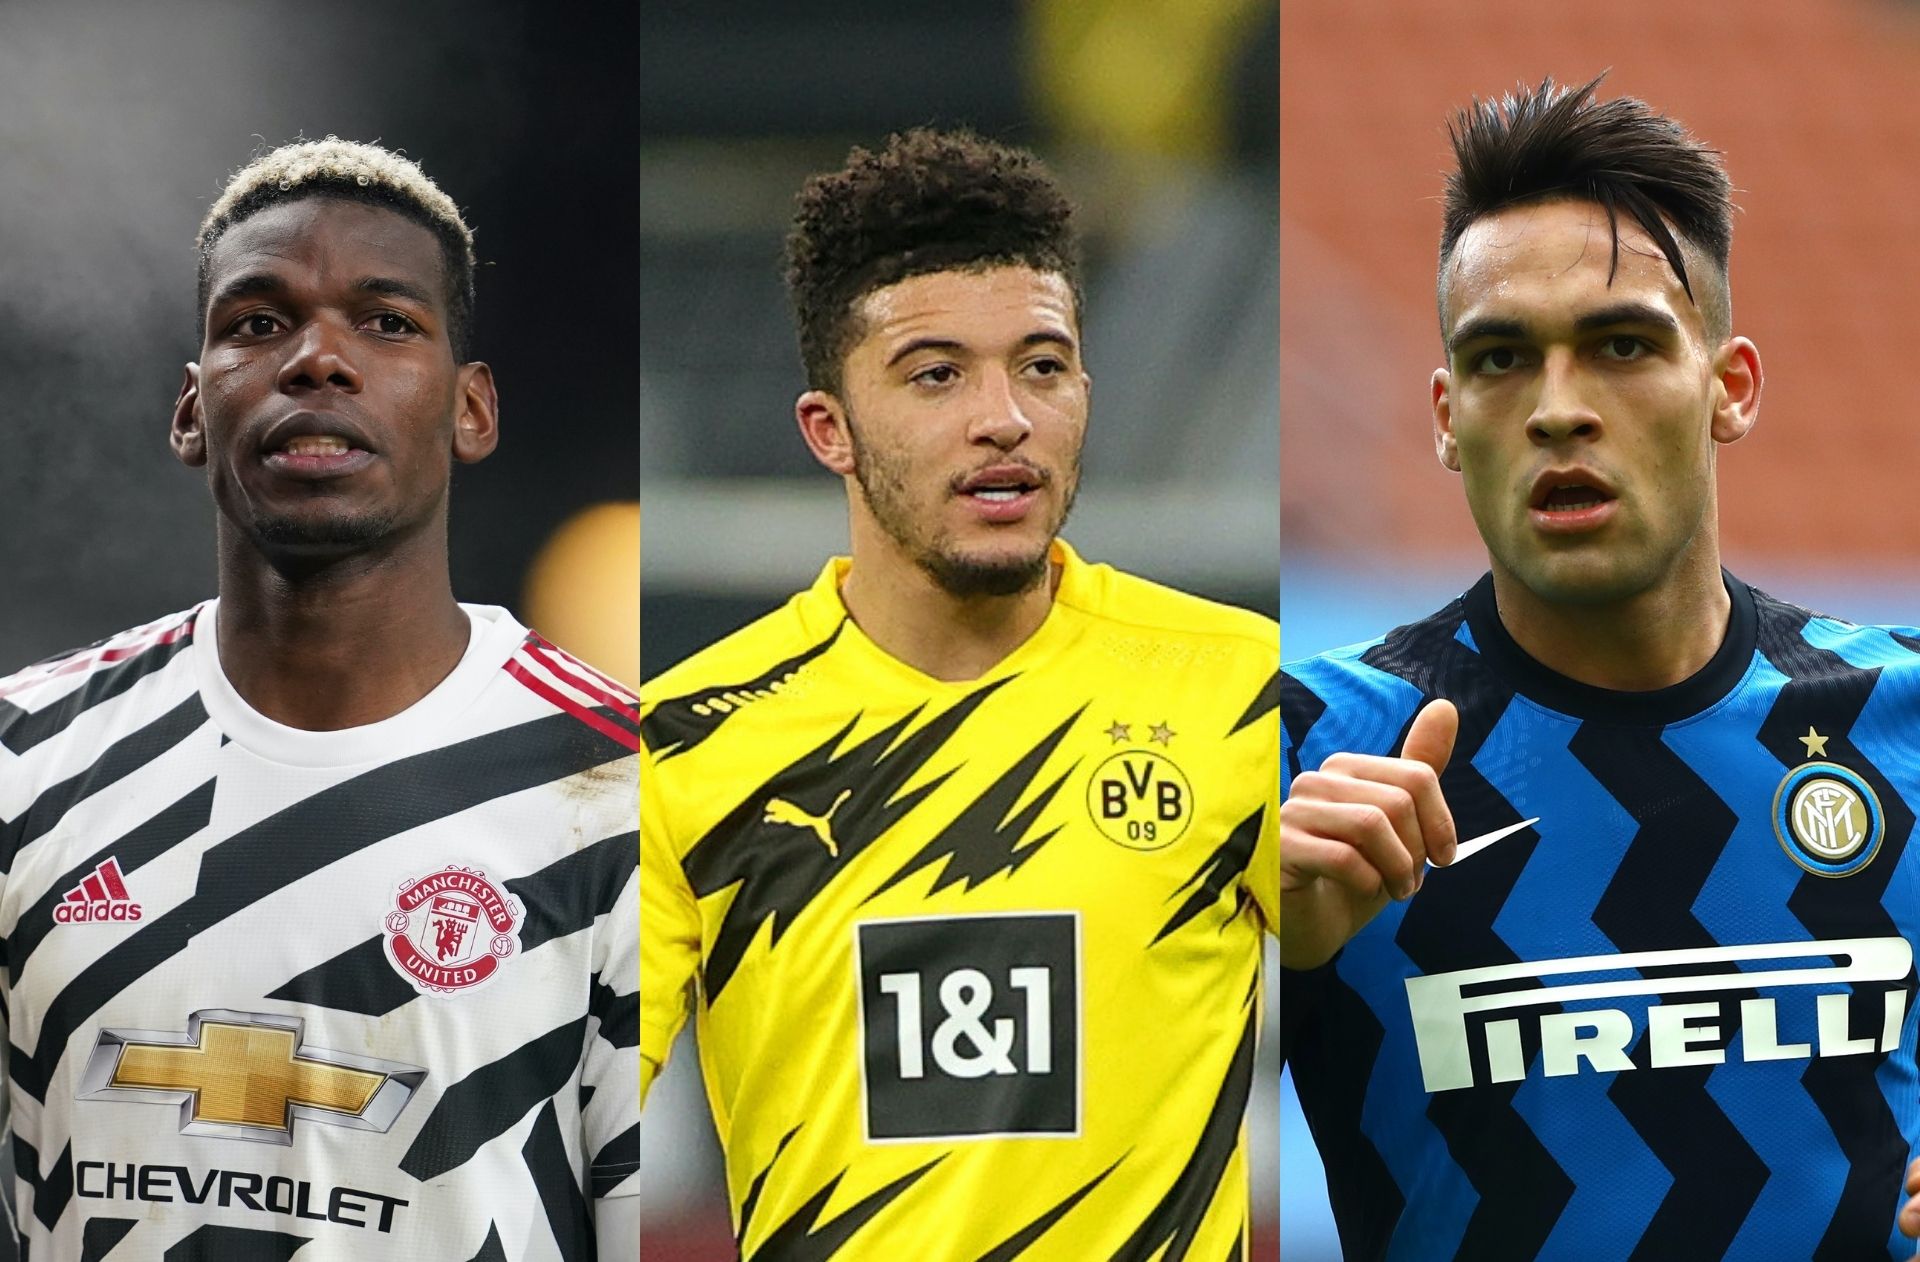 Sunday's transfer rumors - Dortmund name a Sancho replacement